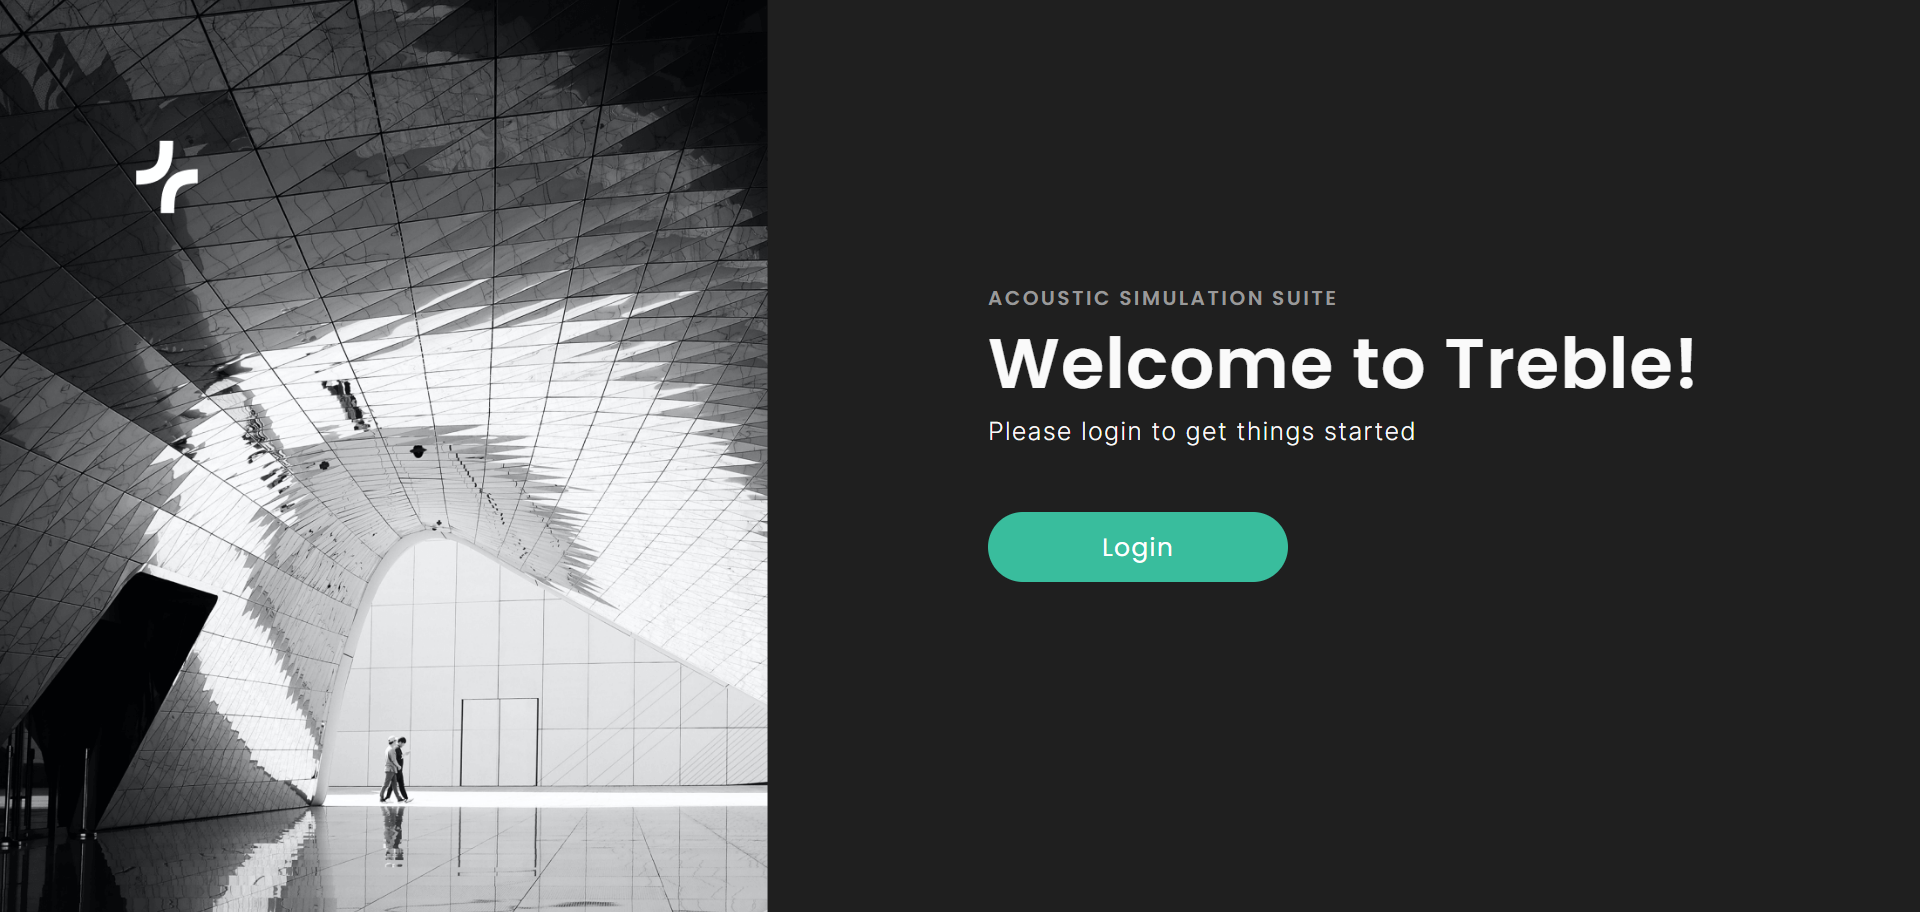 Web app welcome page